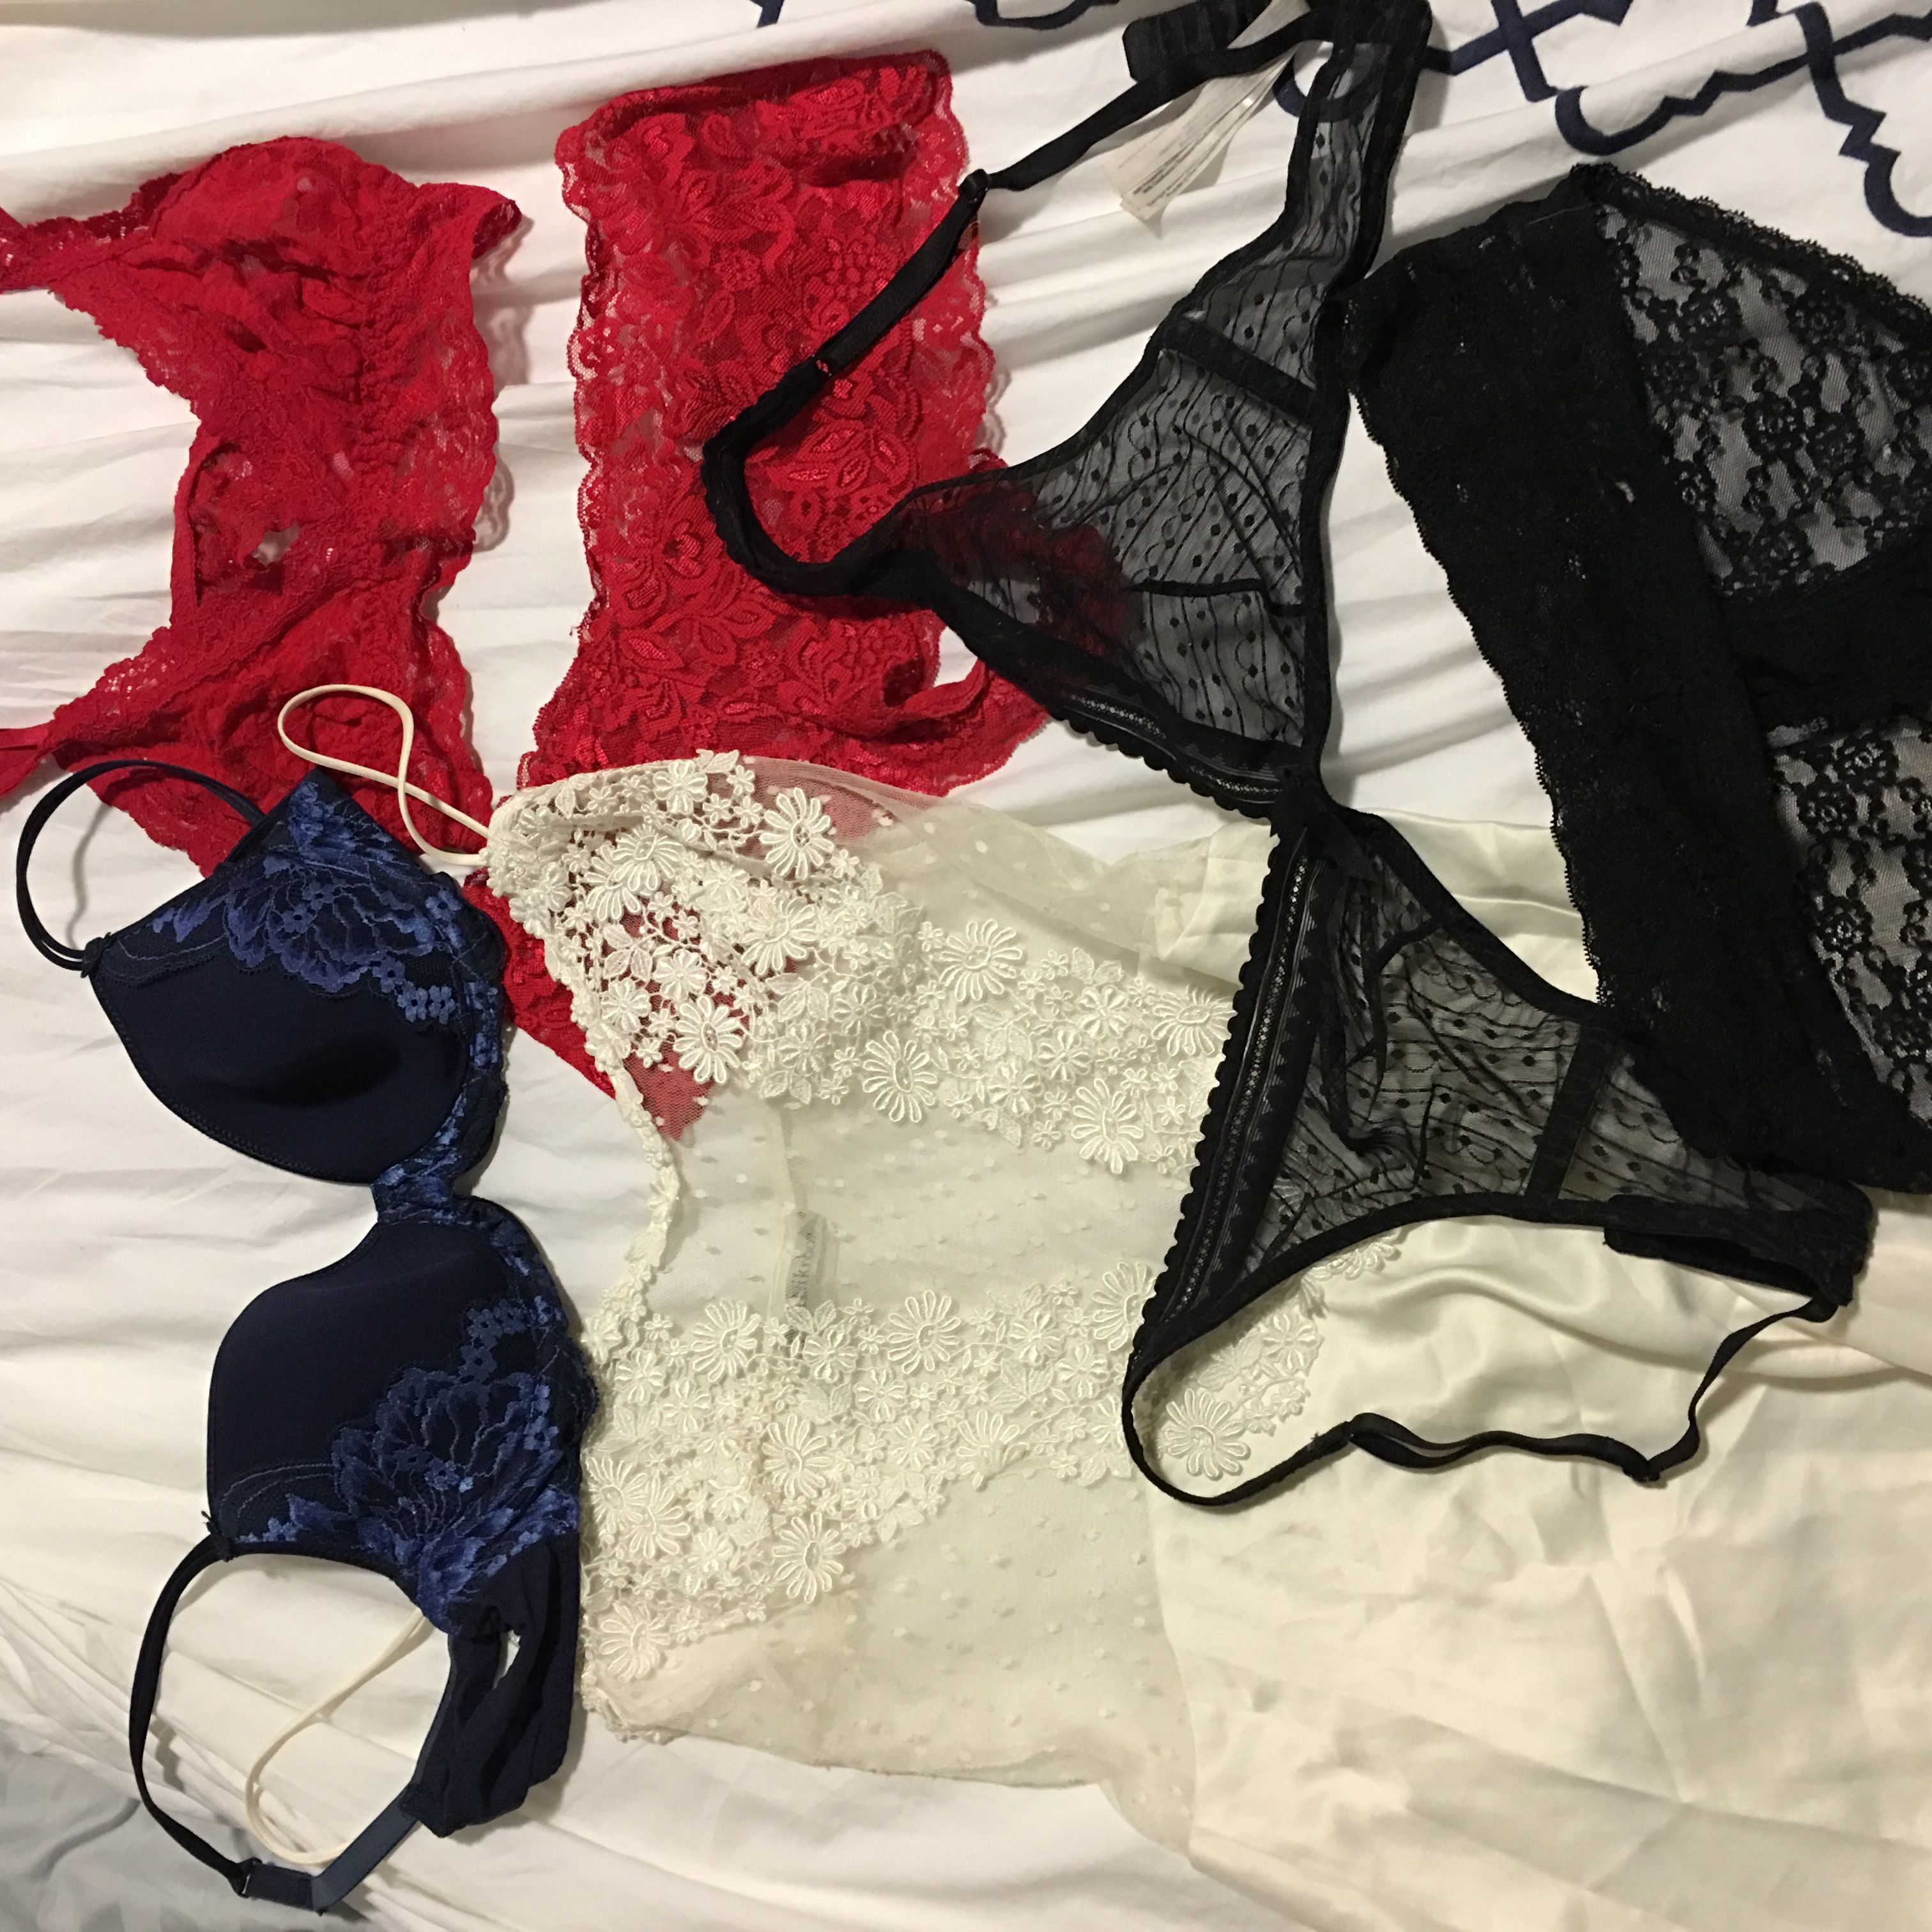 Why I Began My New Marriage With a Trip to a French Lingerie Store